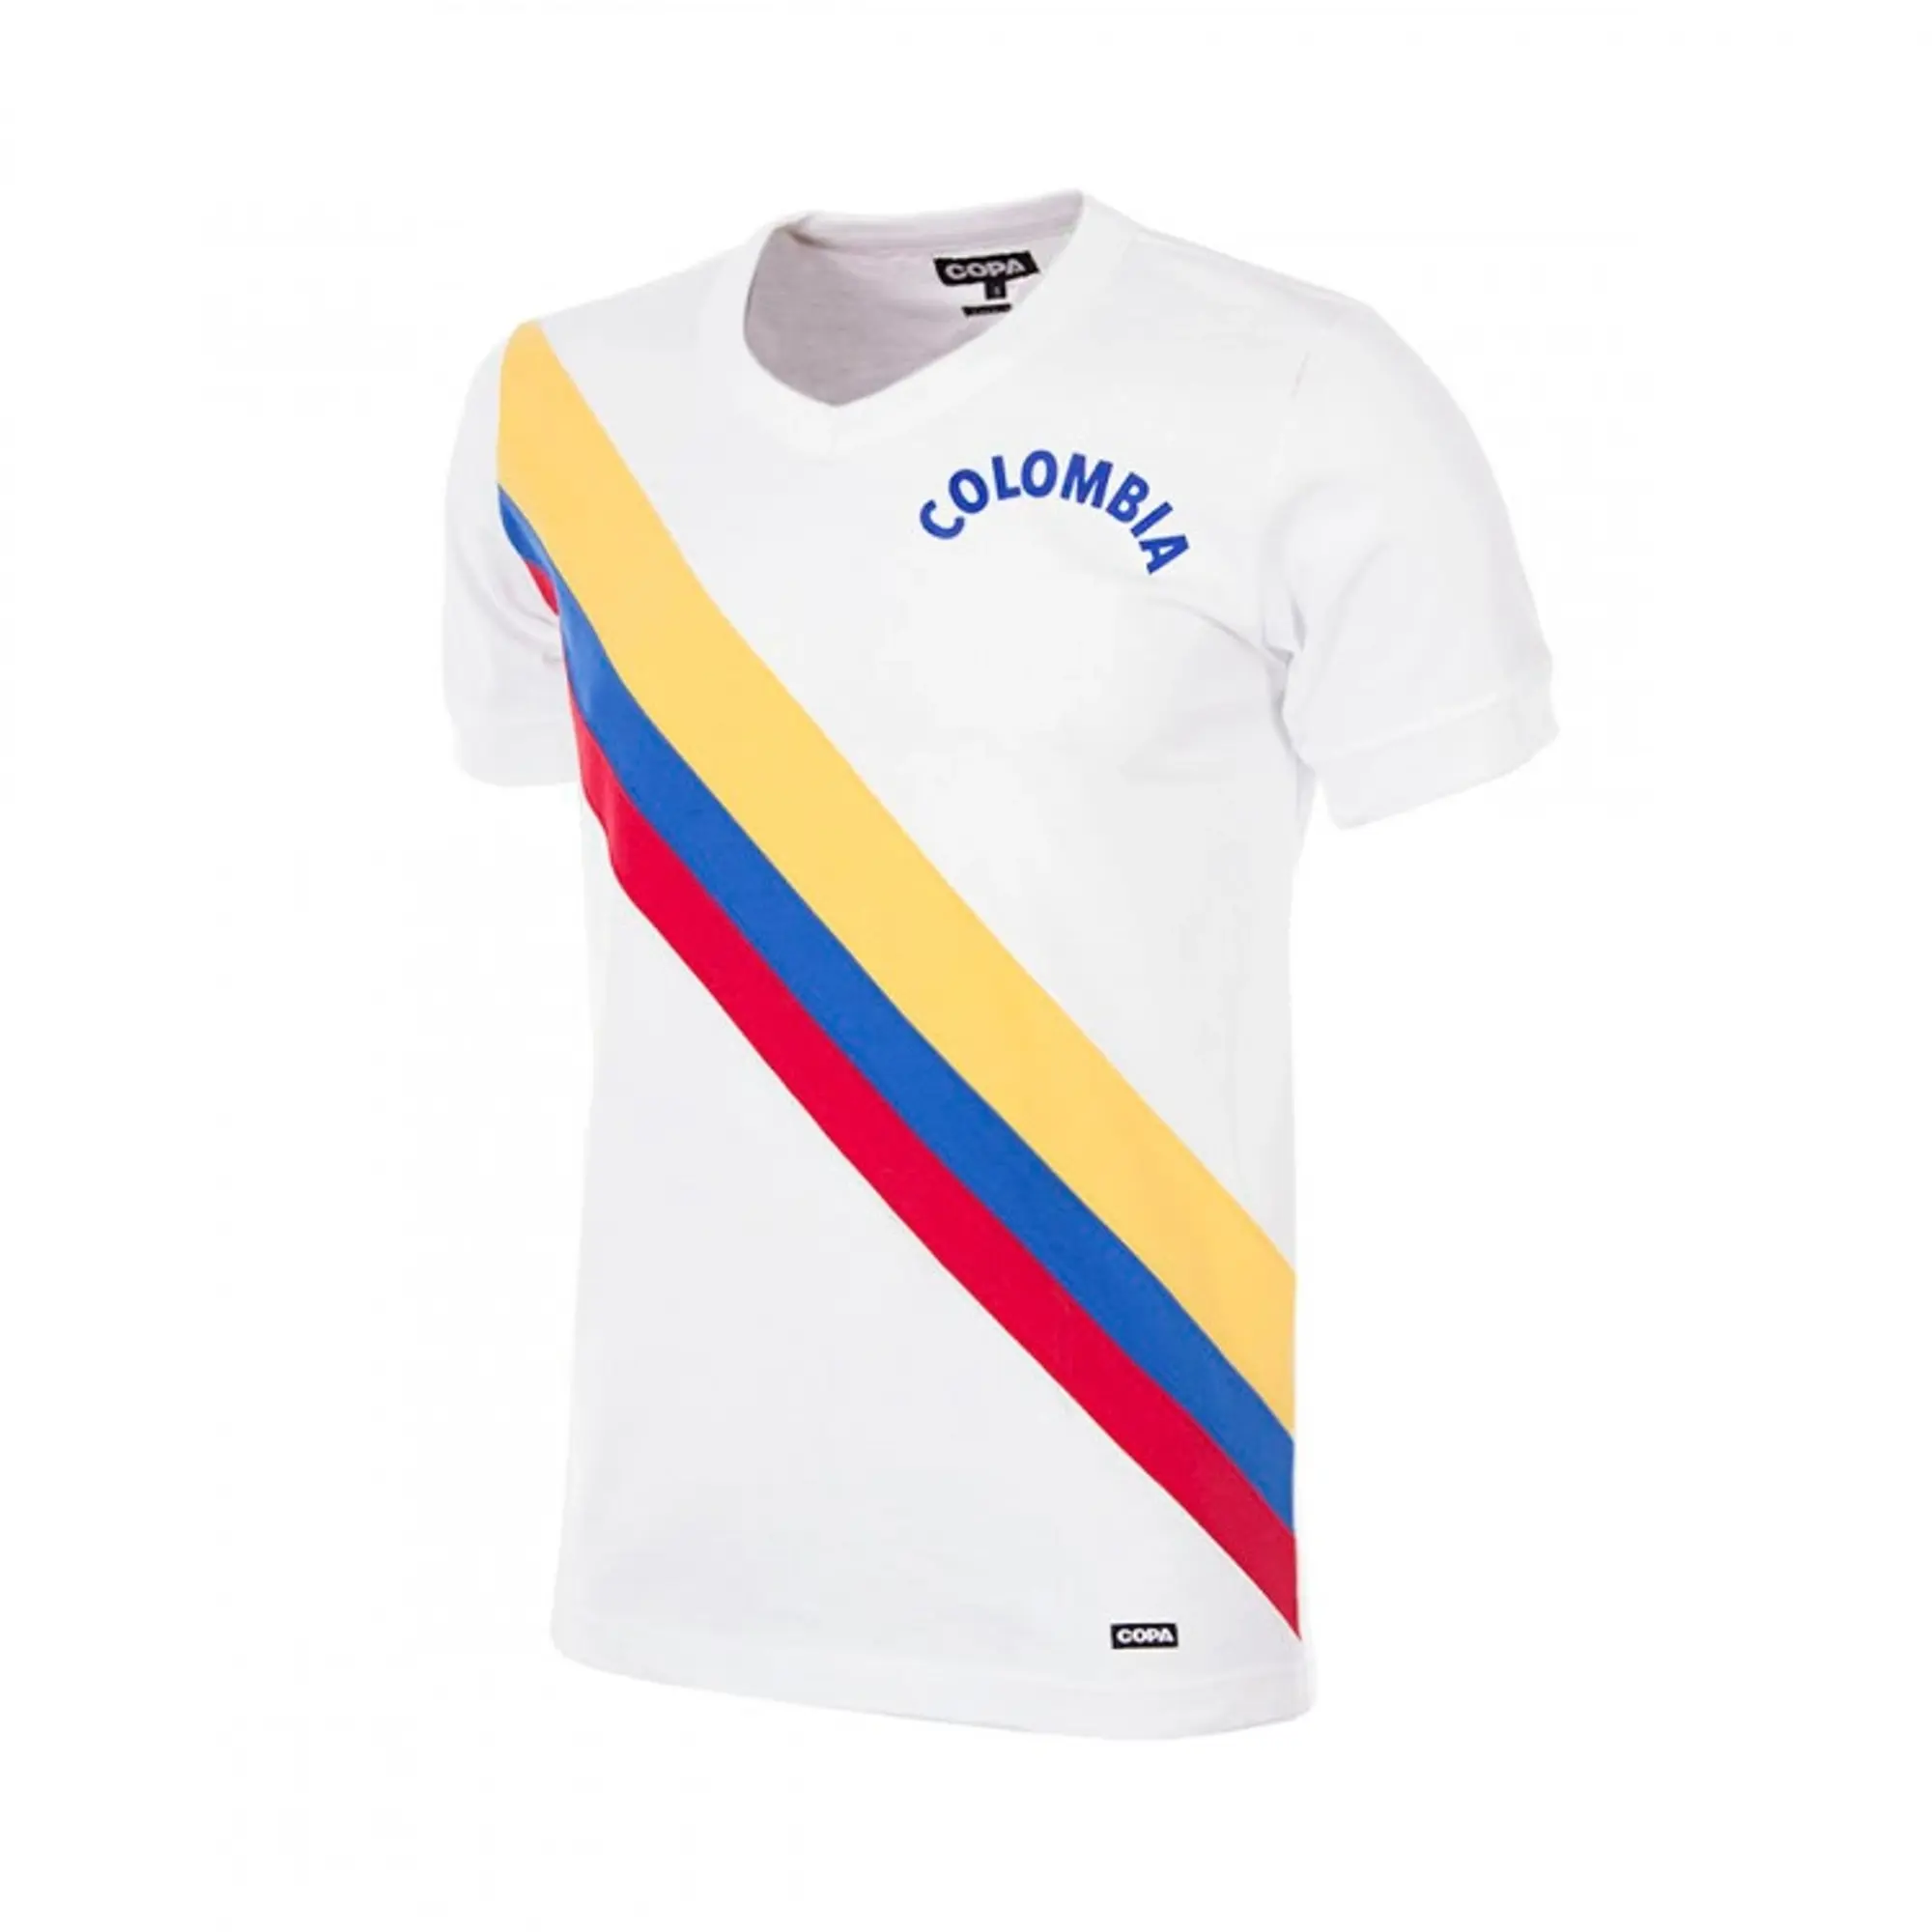 COPA Colombia Mens SS Home Shirt 1973